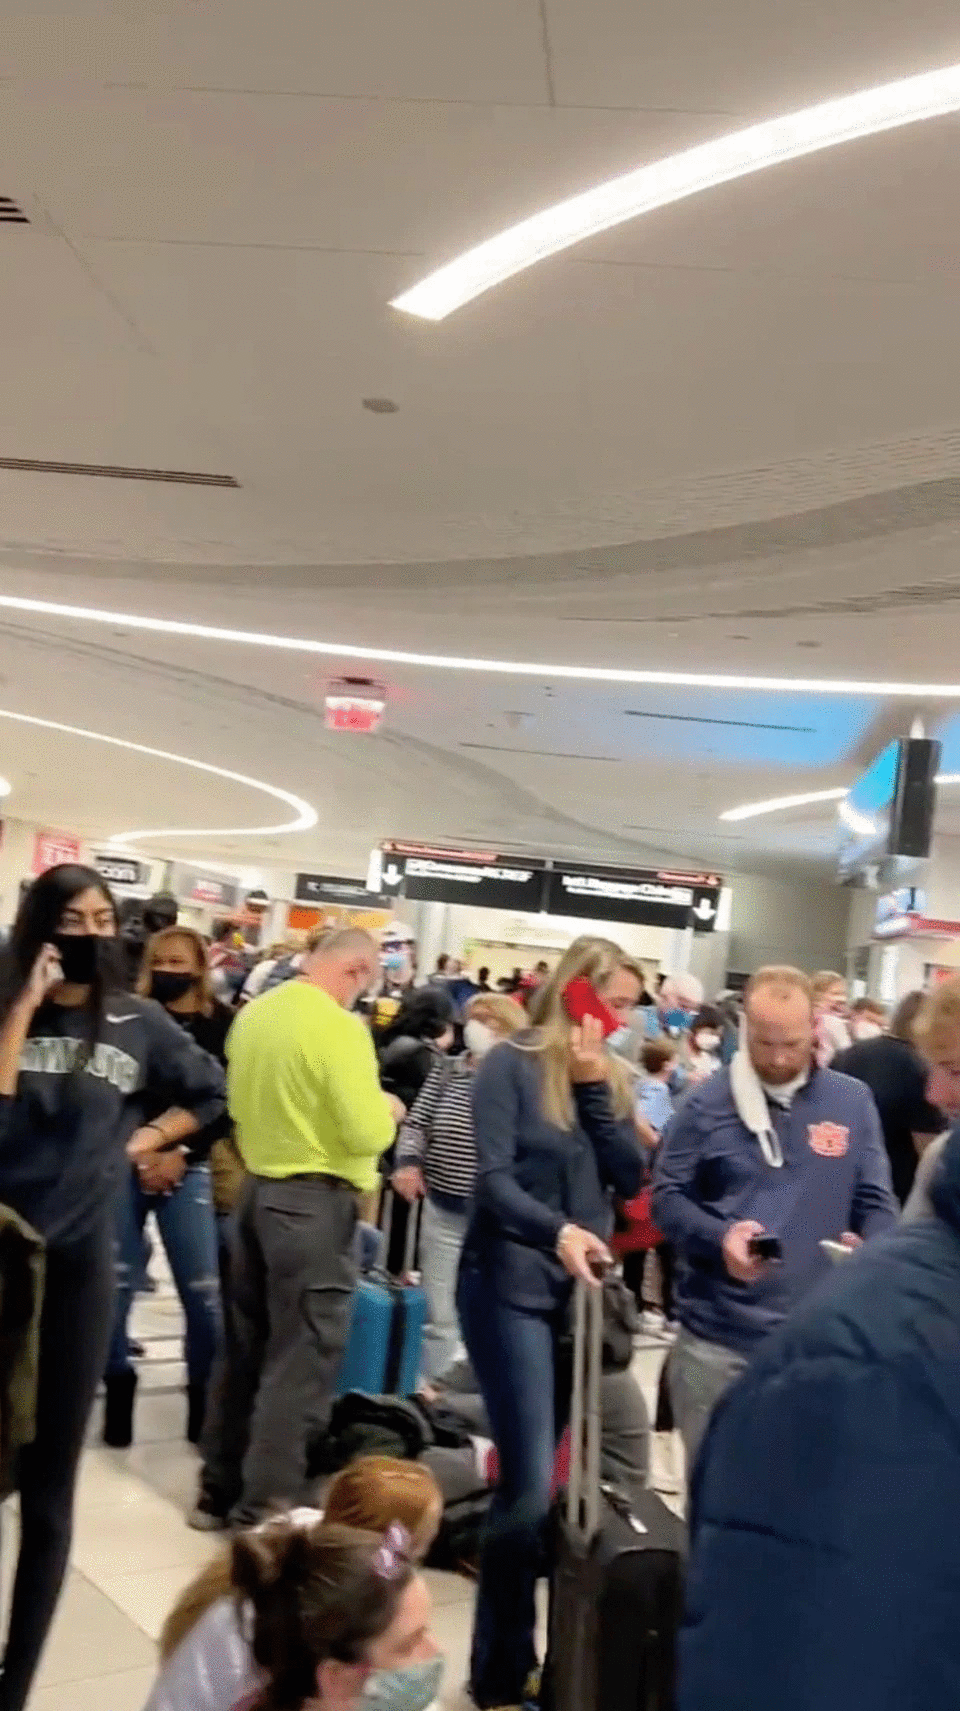 People gather to leave Hartsfield-Jackson Atlanta International Airport after reported shooting, in Atlanta, Georgia, U.S., November 20, 2021, in this still image obtained from a social media video. Photo: Twitter/mohiterajas/via Reuters